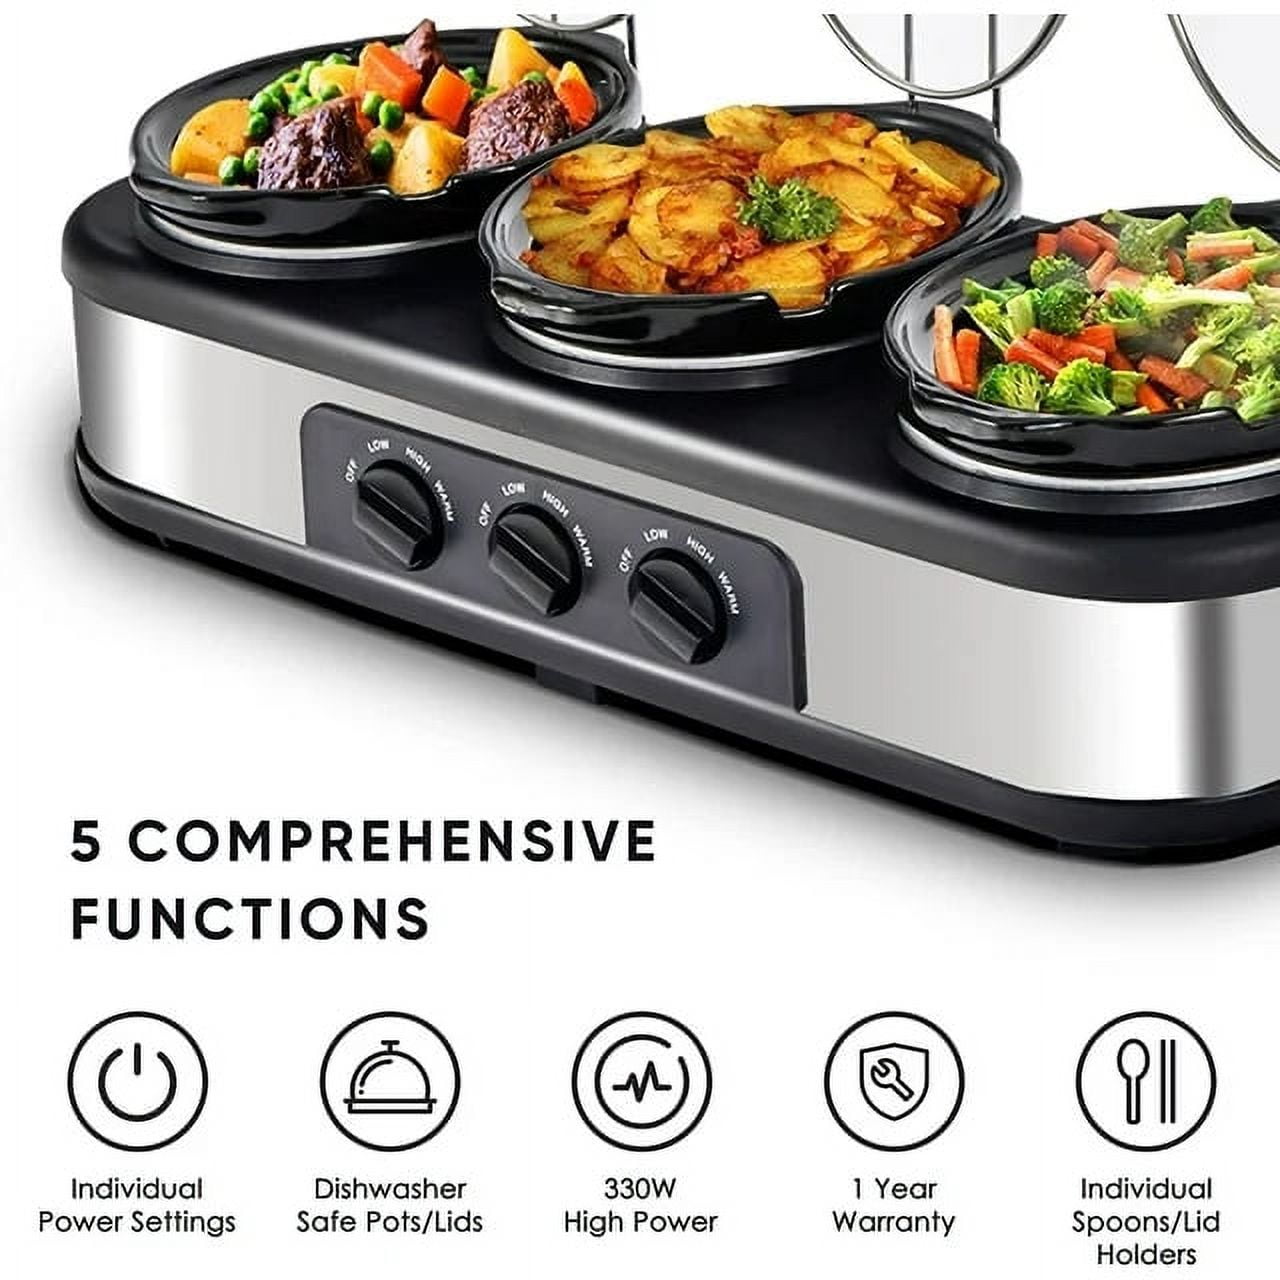 Triple 4.5 QT Slow Cooker, Buffet Servers and Warmer, 3 Pot Mini Manual Slow  Cooker with Adjustable Temp, Lid Rests, Ceramic Pot - On Sale - Bed Bath &  Beyond - 39085863